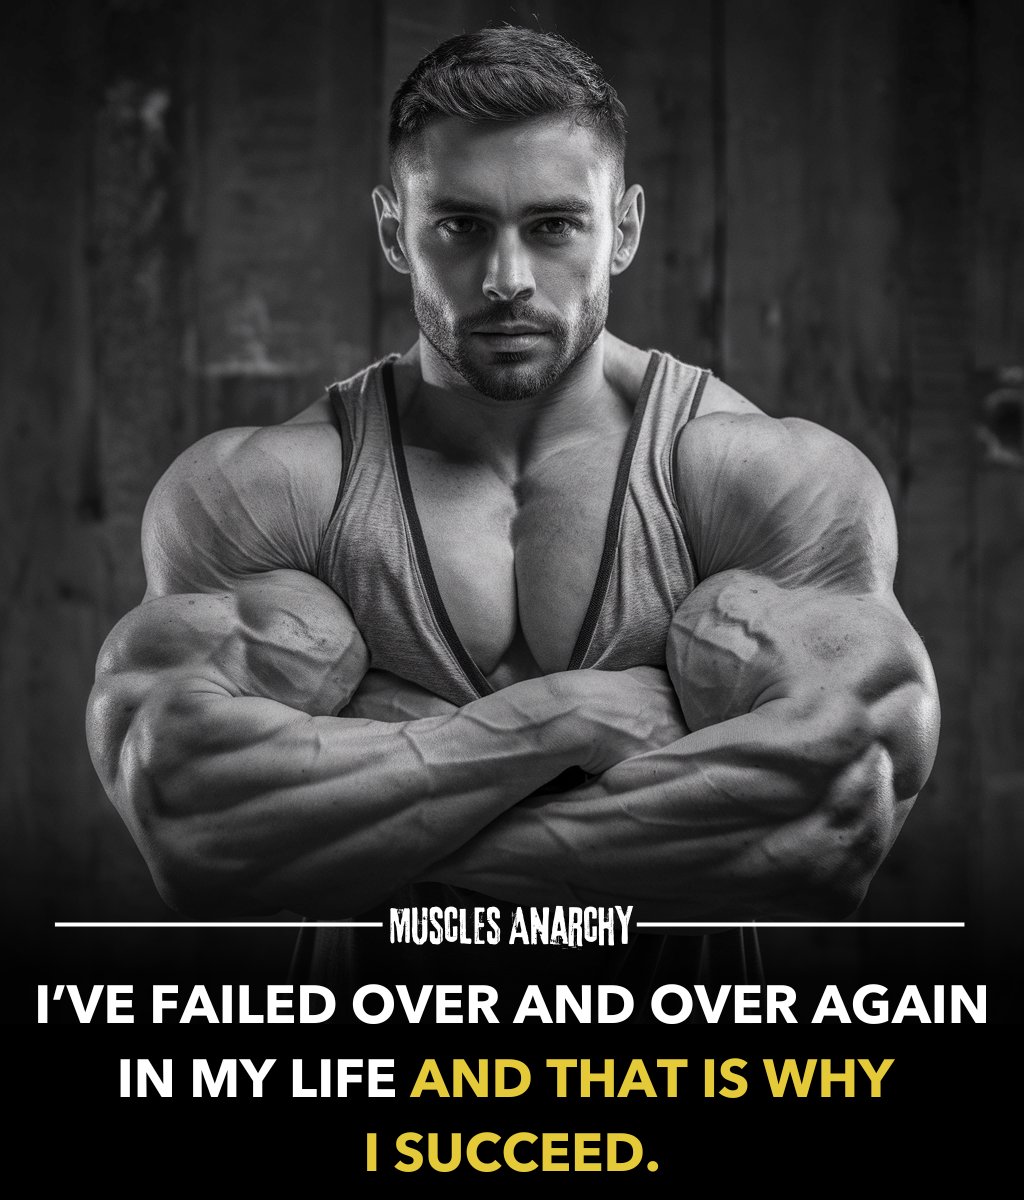 i’ve failed over and over again in my life and that is why i succeed.

#disciplineyourself #consistencyiskey #selfimprovement #gymmotivationquotes #gymmotivation